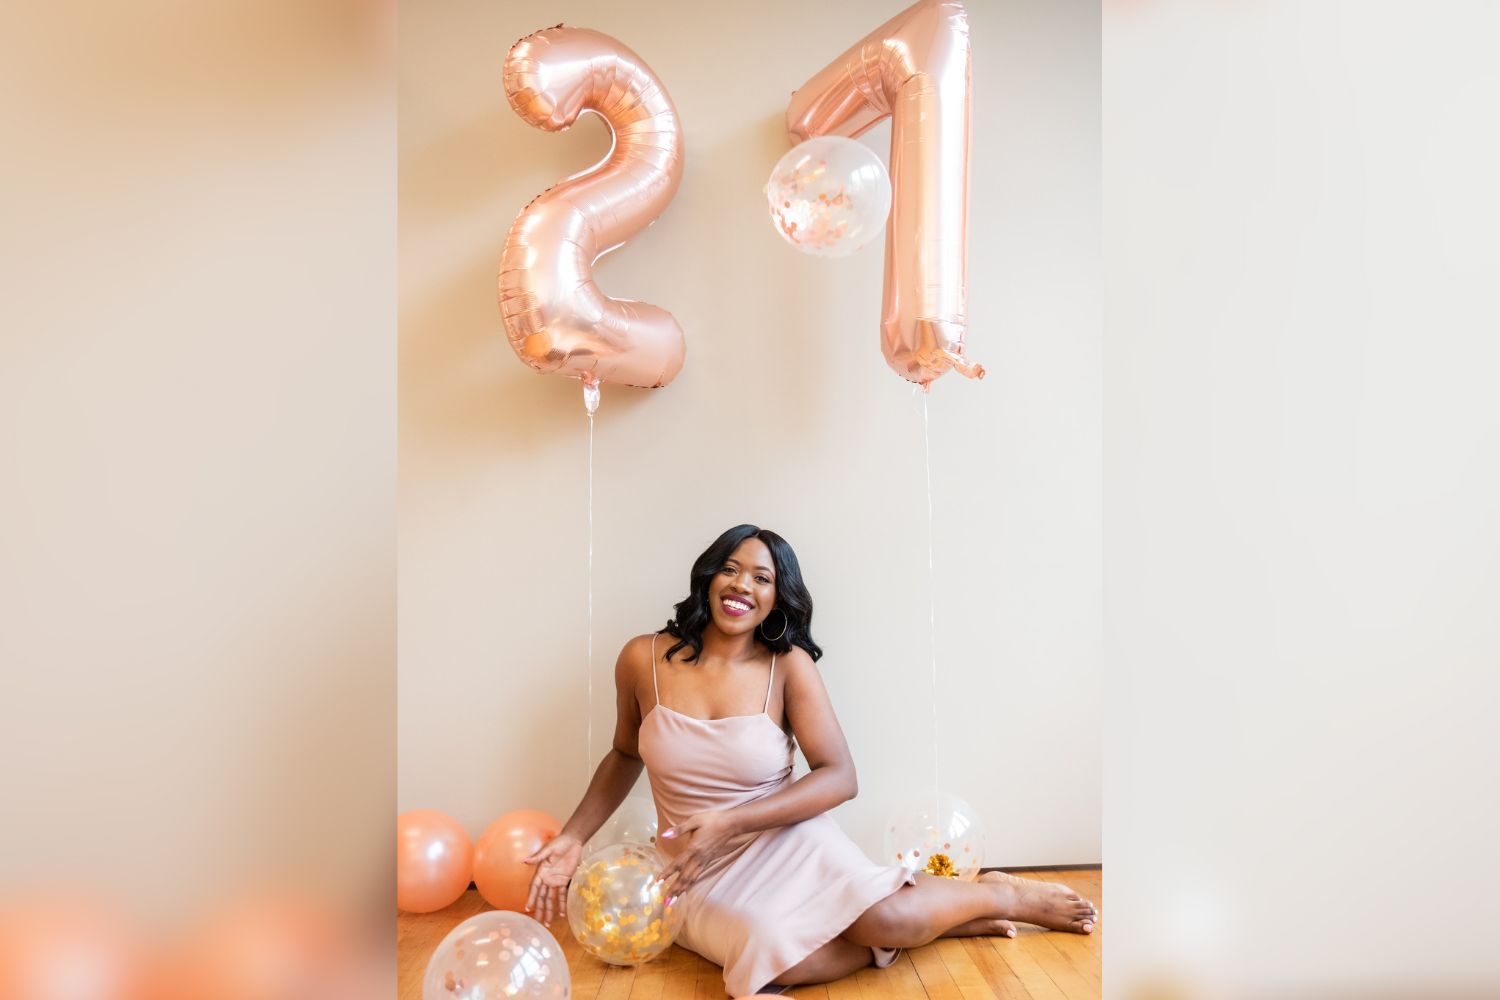 25 Props and Ideas For Your 21st Birthday Photoshoot